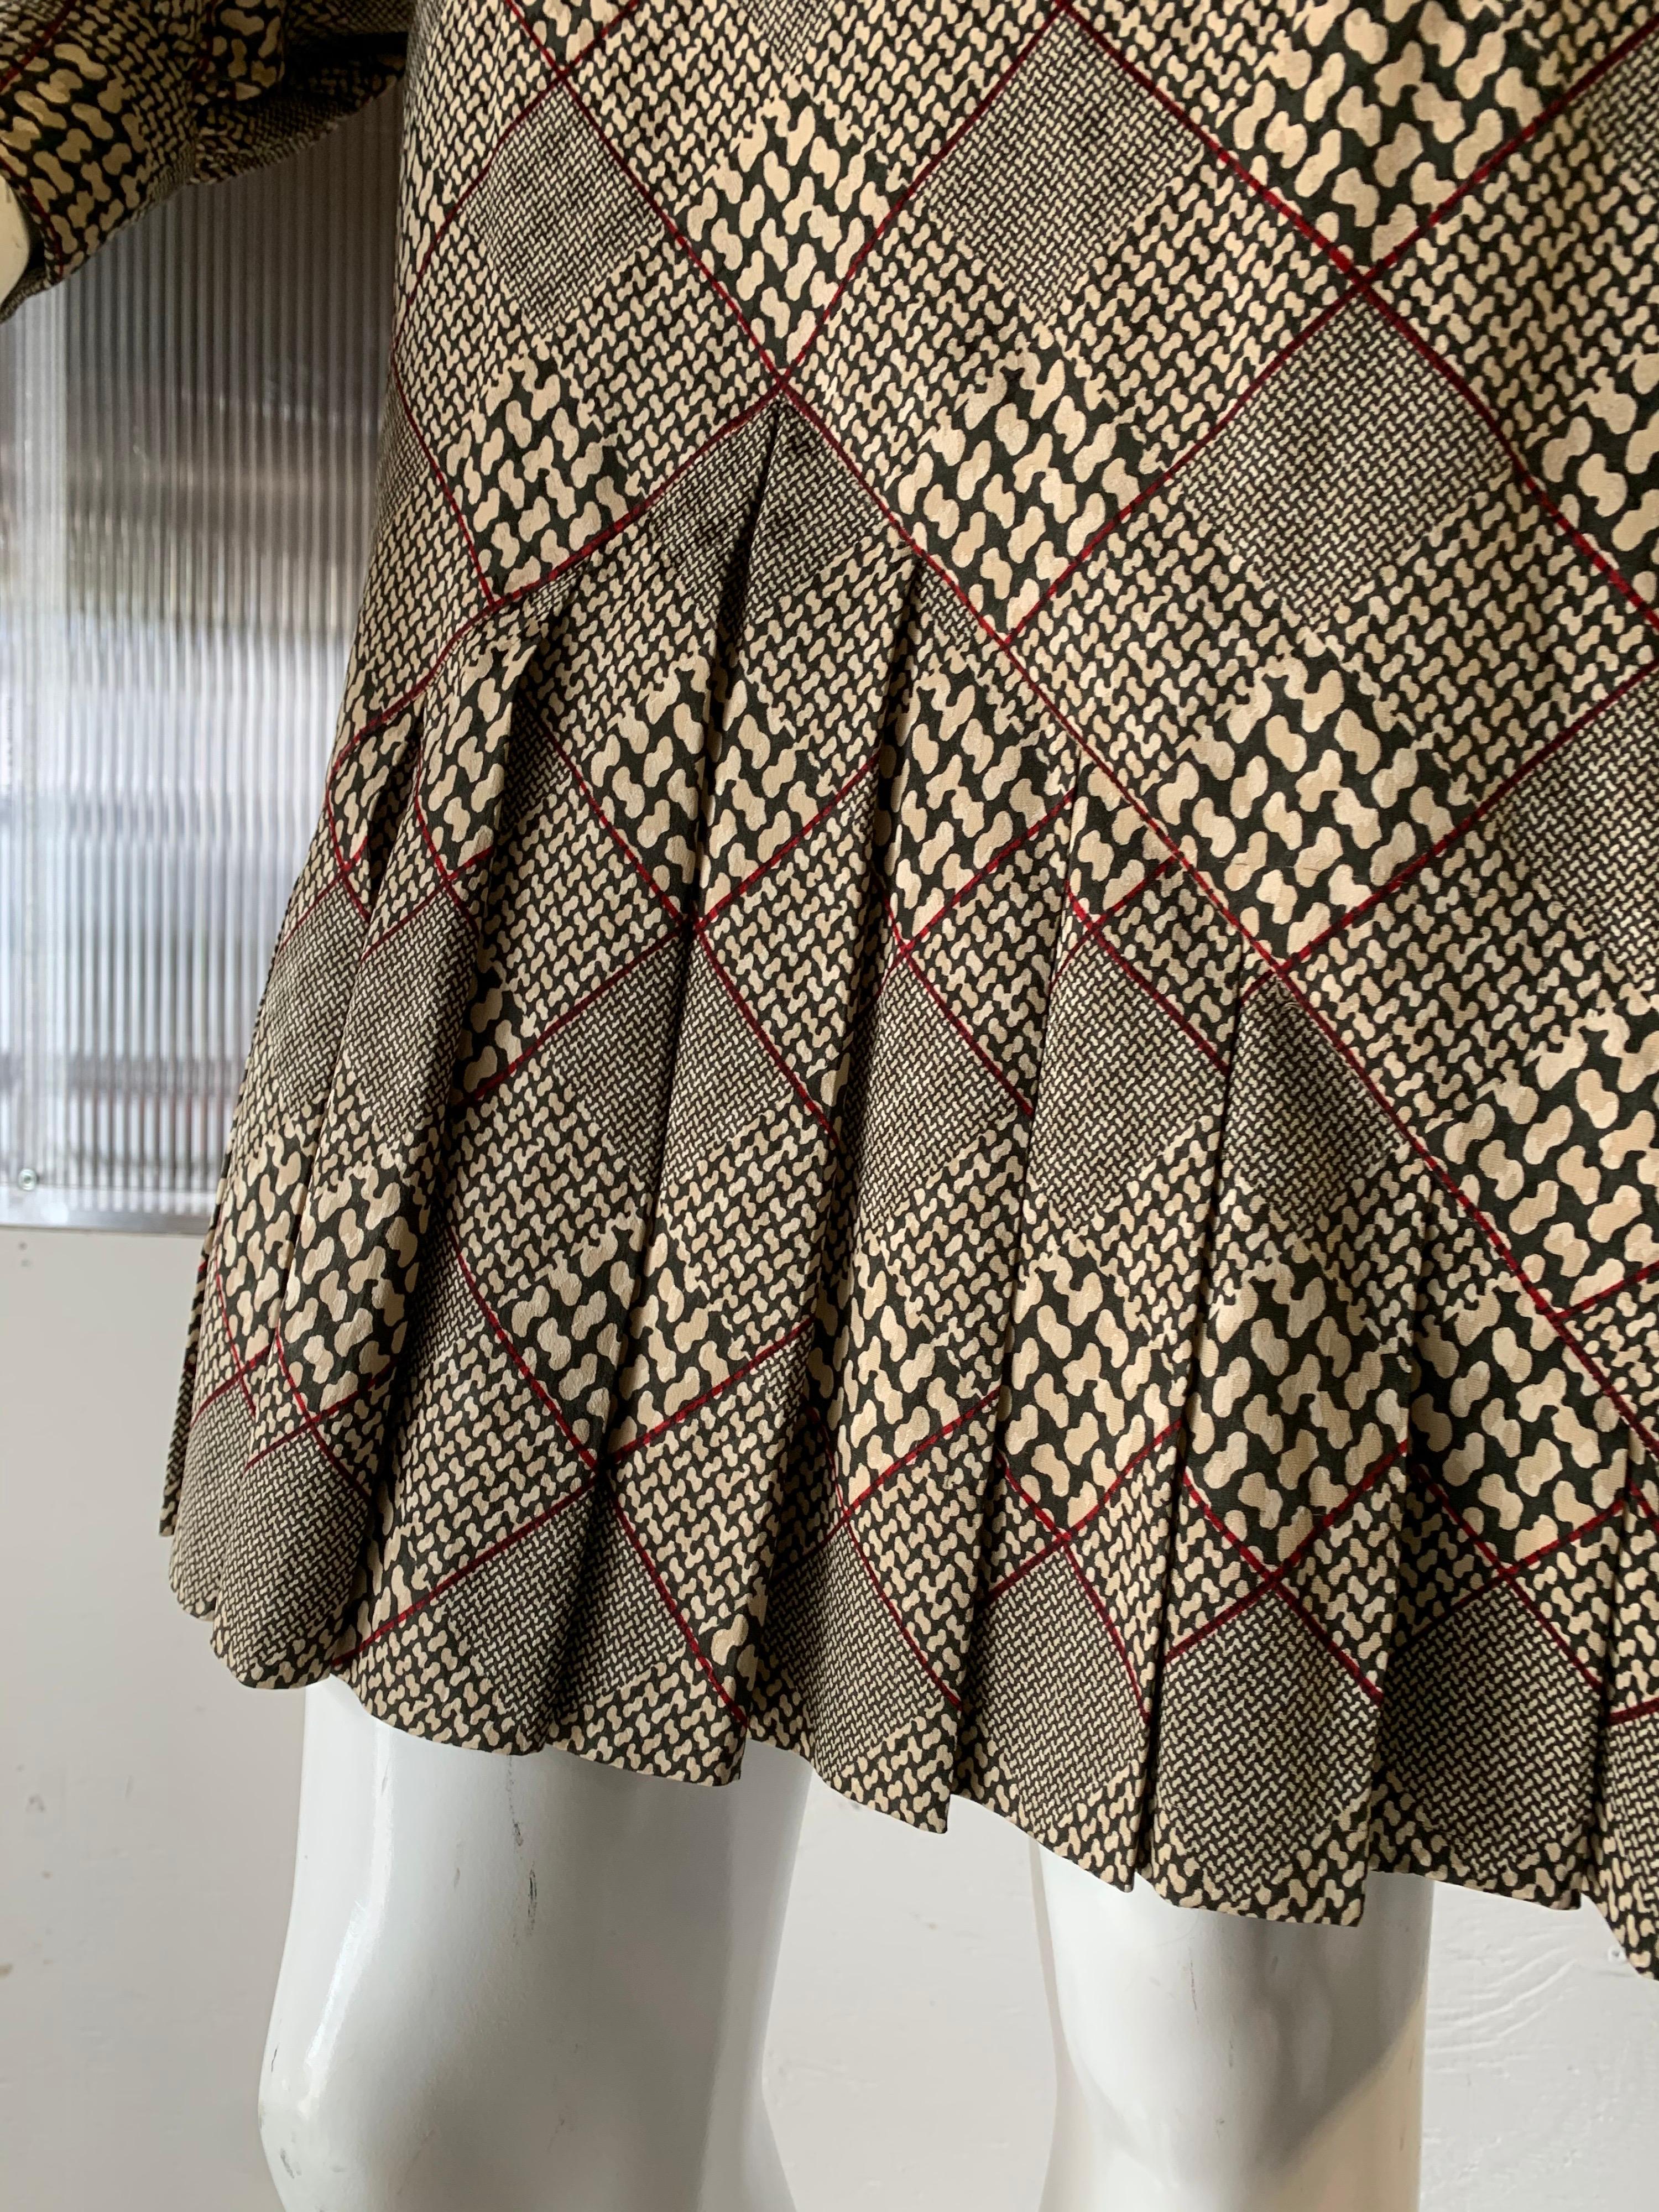 1980s Galanos Silk Dress in a Hounds Tooth Plaid W/ Matching Wool Jacket & Scarf In Excellent Condition For Sale In Gresham, OR